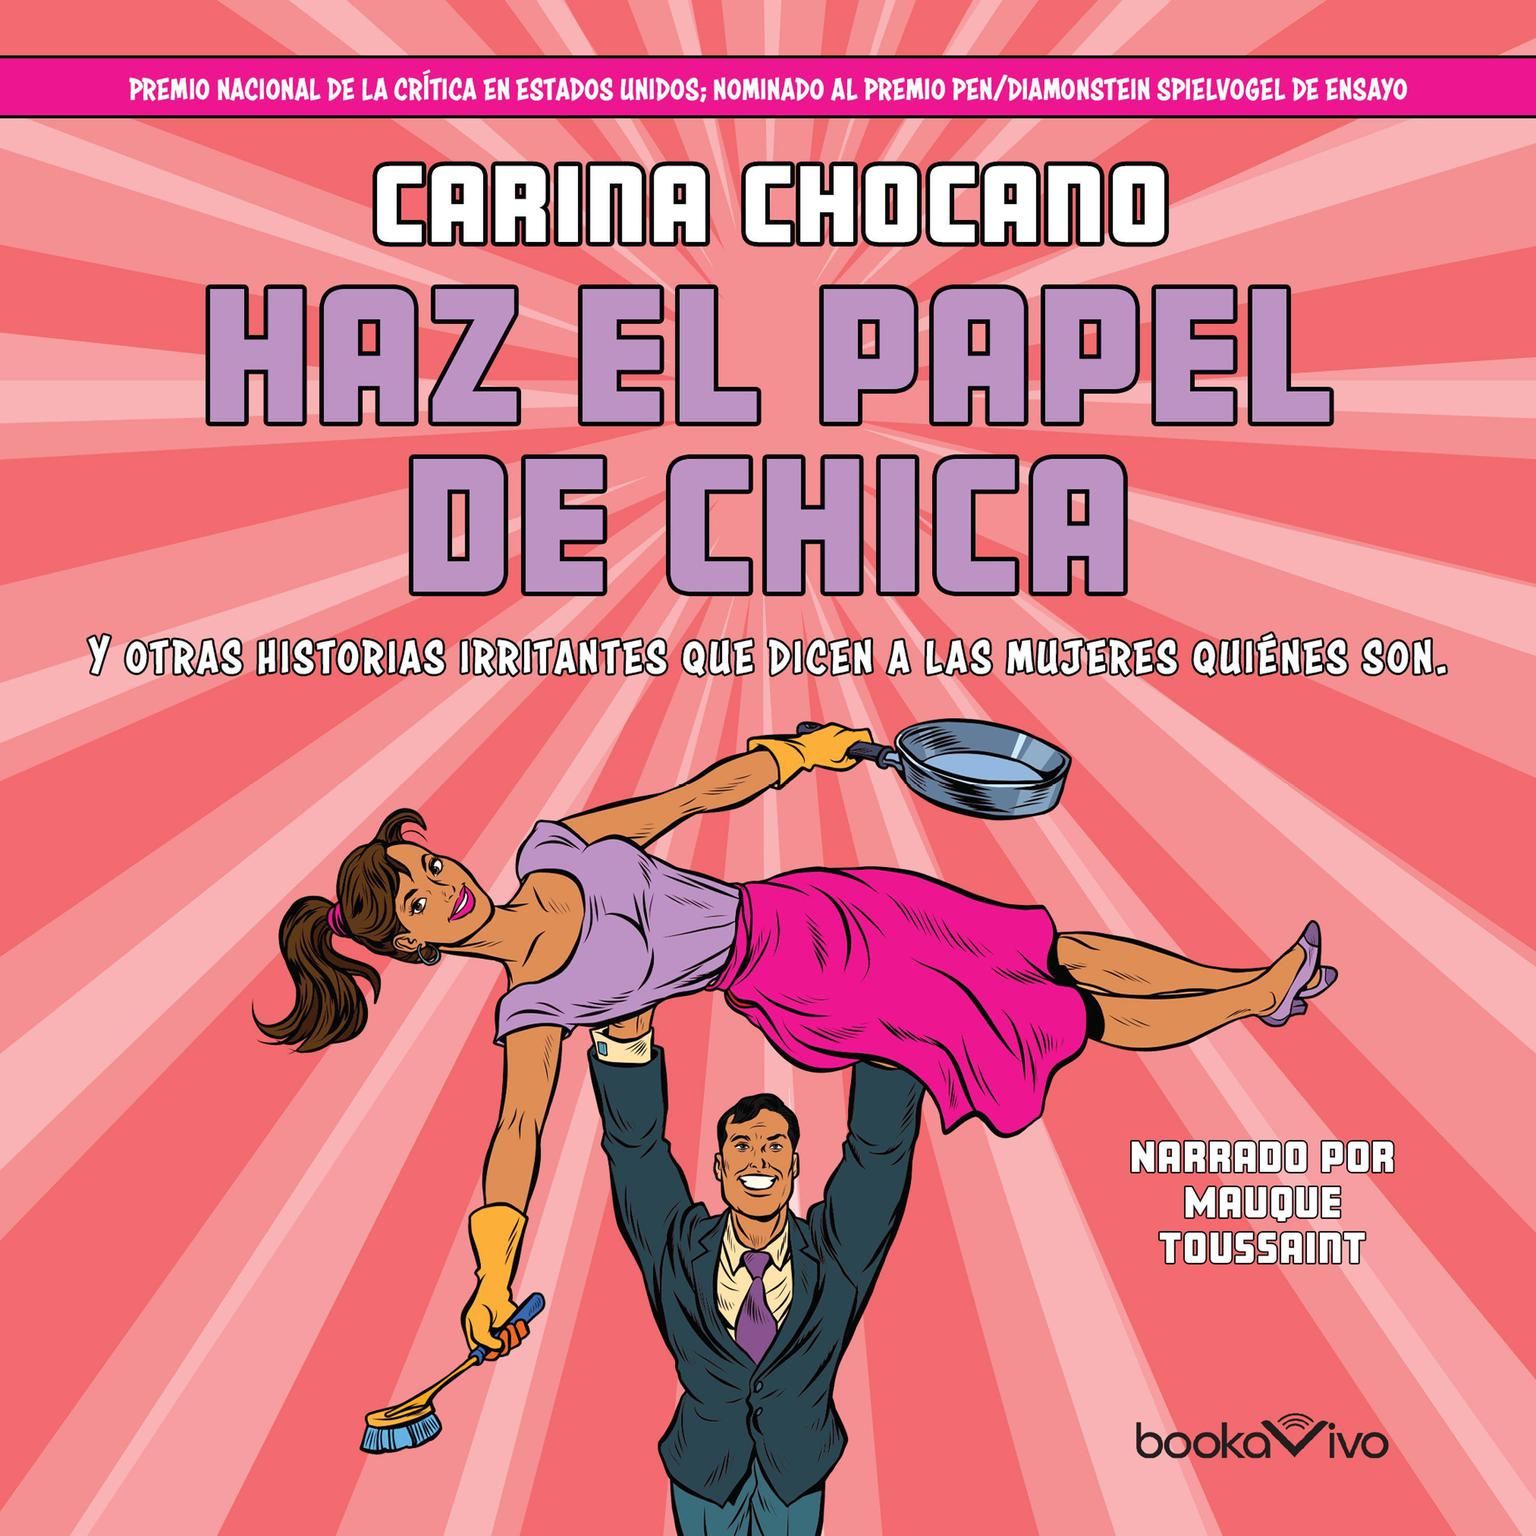 Haz el papel de chica (You Play the Girl): Y otras historias irritantes que dicen a las mujeres quie´nes son (And Other Vexing Stories That Tell Women Who They Are) Audiobook, by Carina Chocano